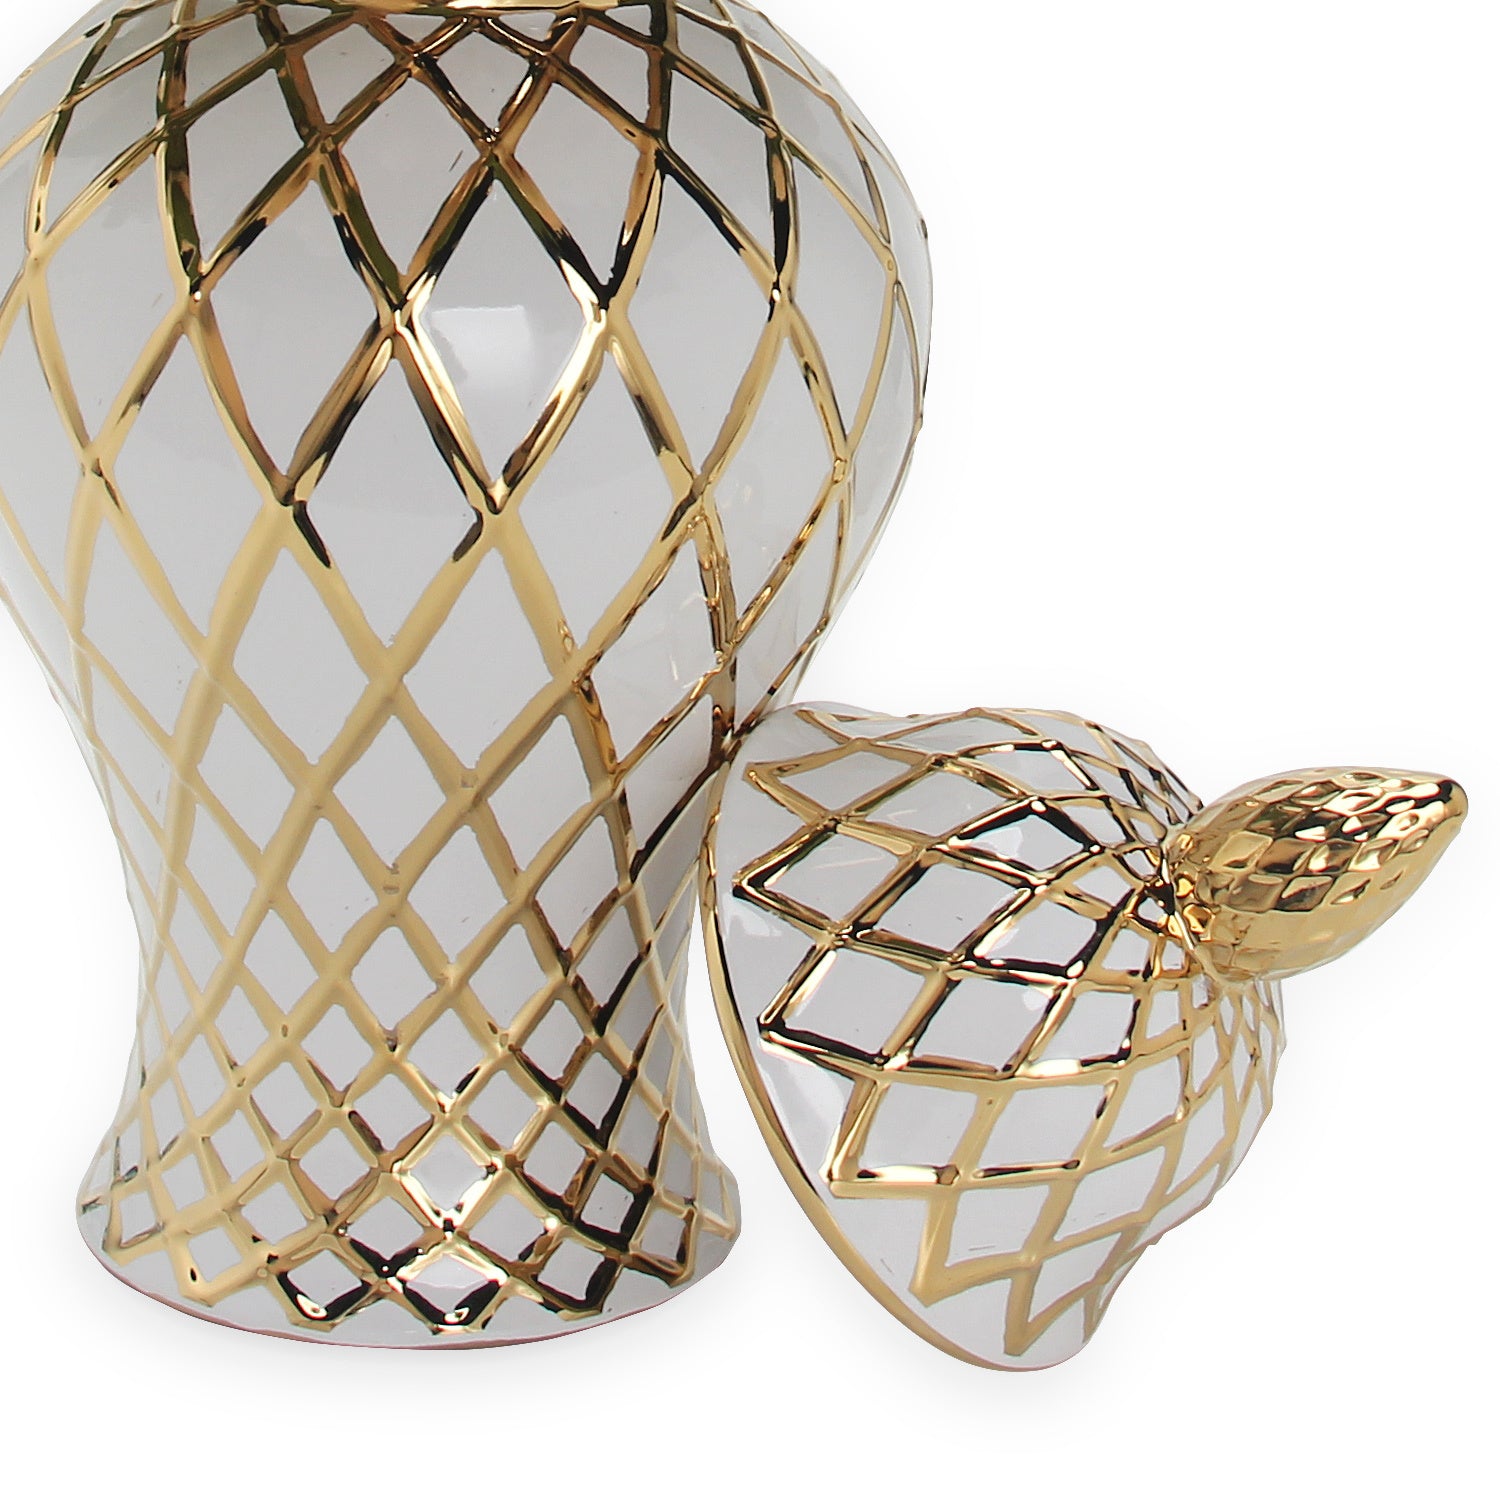 A White and Gold Ceramic Decorative Ginger Jar Vase on a white background.